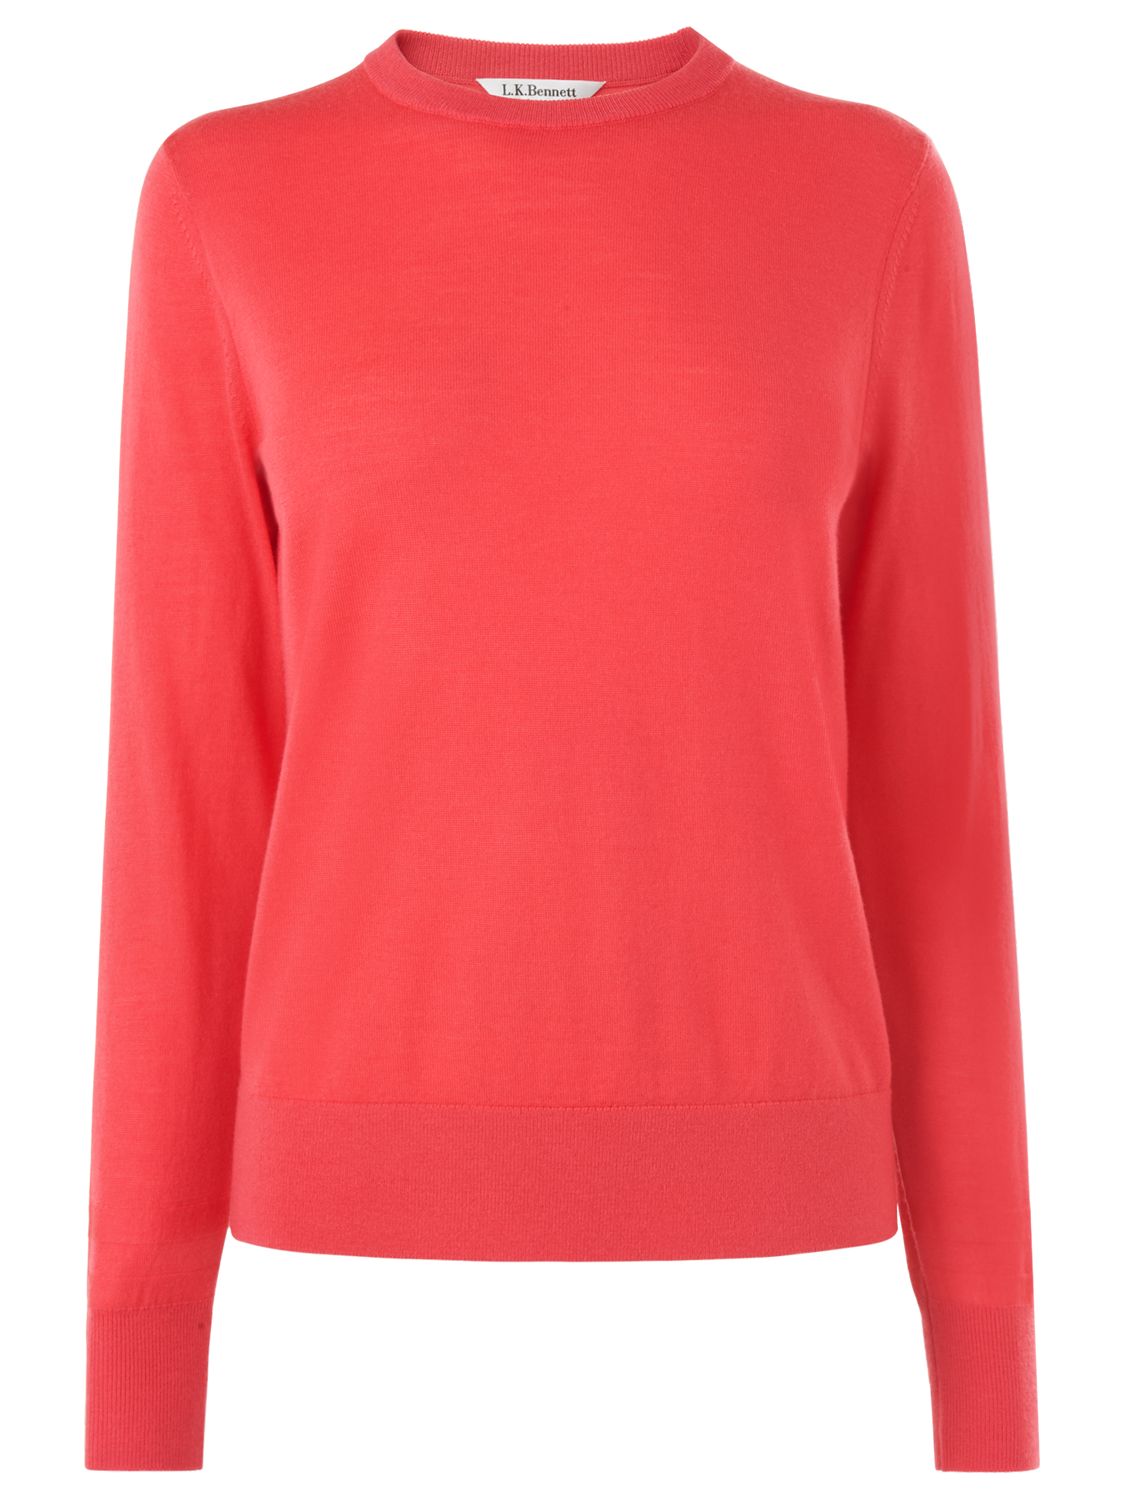 L.K.Bennett Ceries Knitted Top at John Lewis & Partners